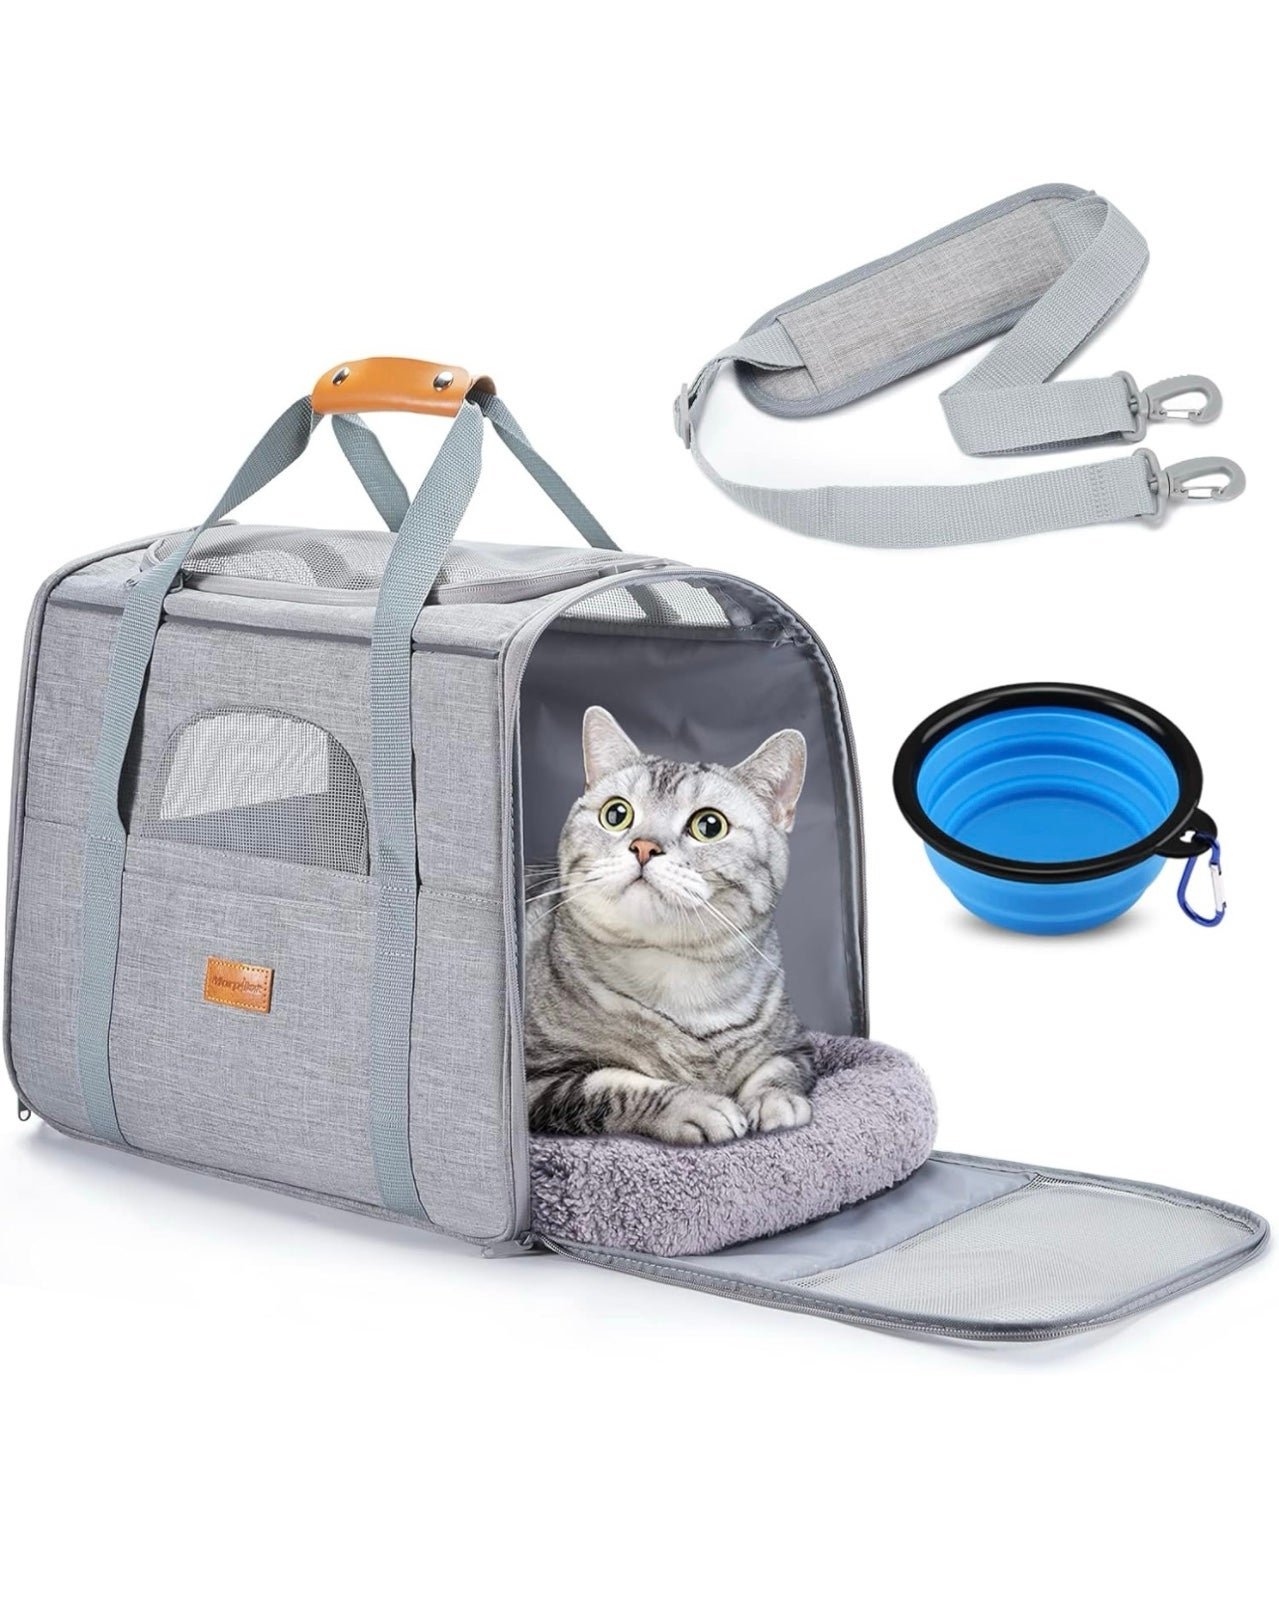 Soft Sided Cat Carrier for Medium Cats and Puppies 6CBUxgc15